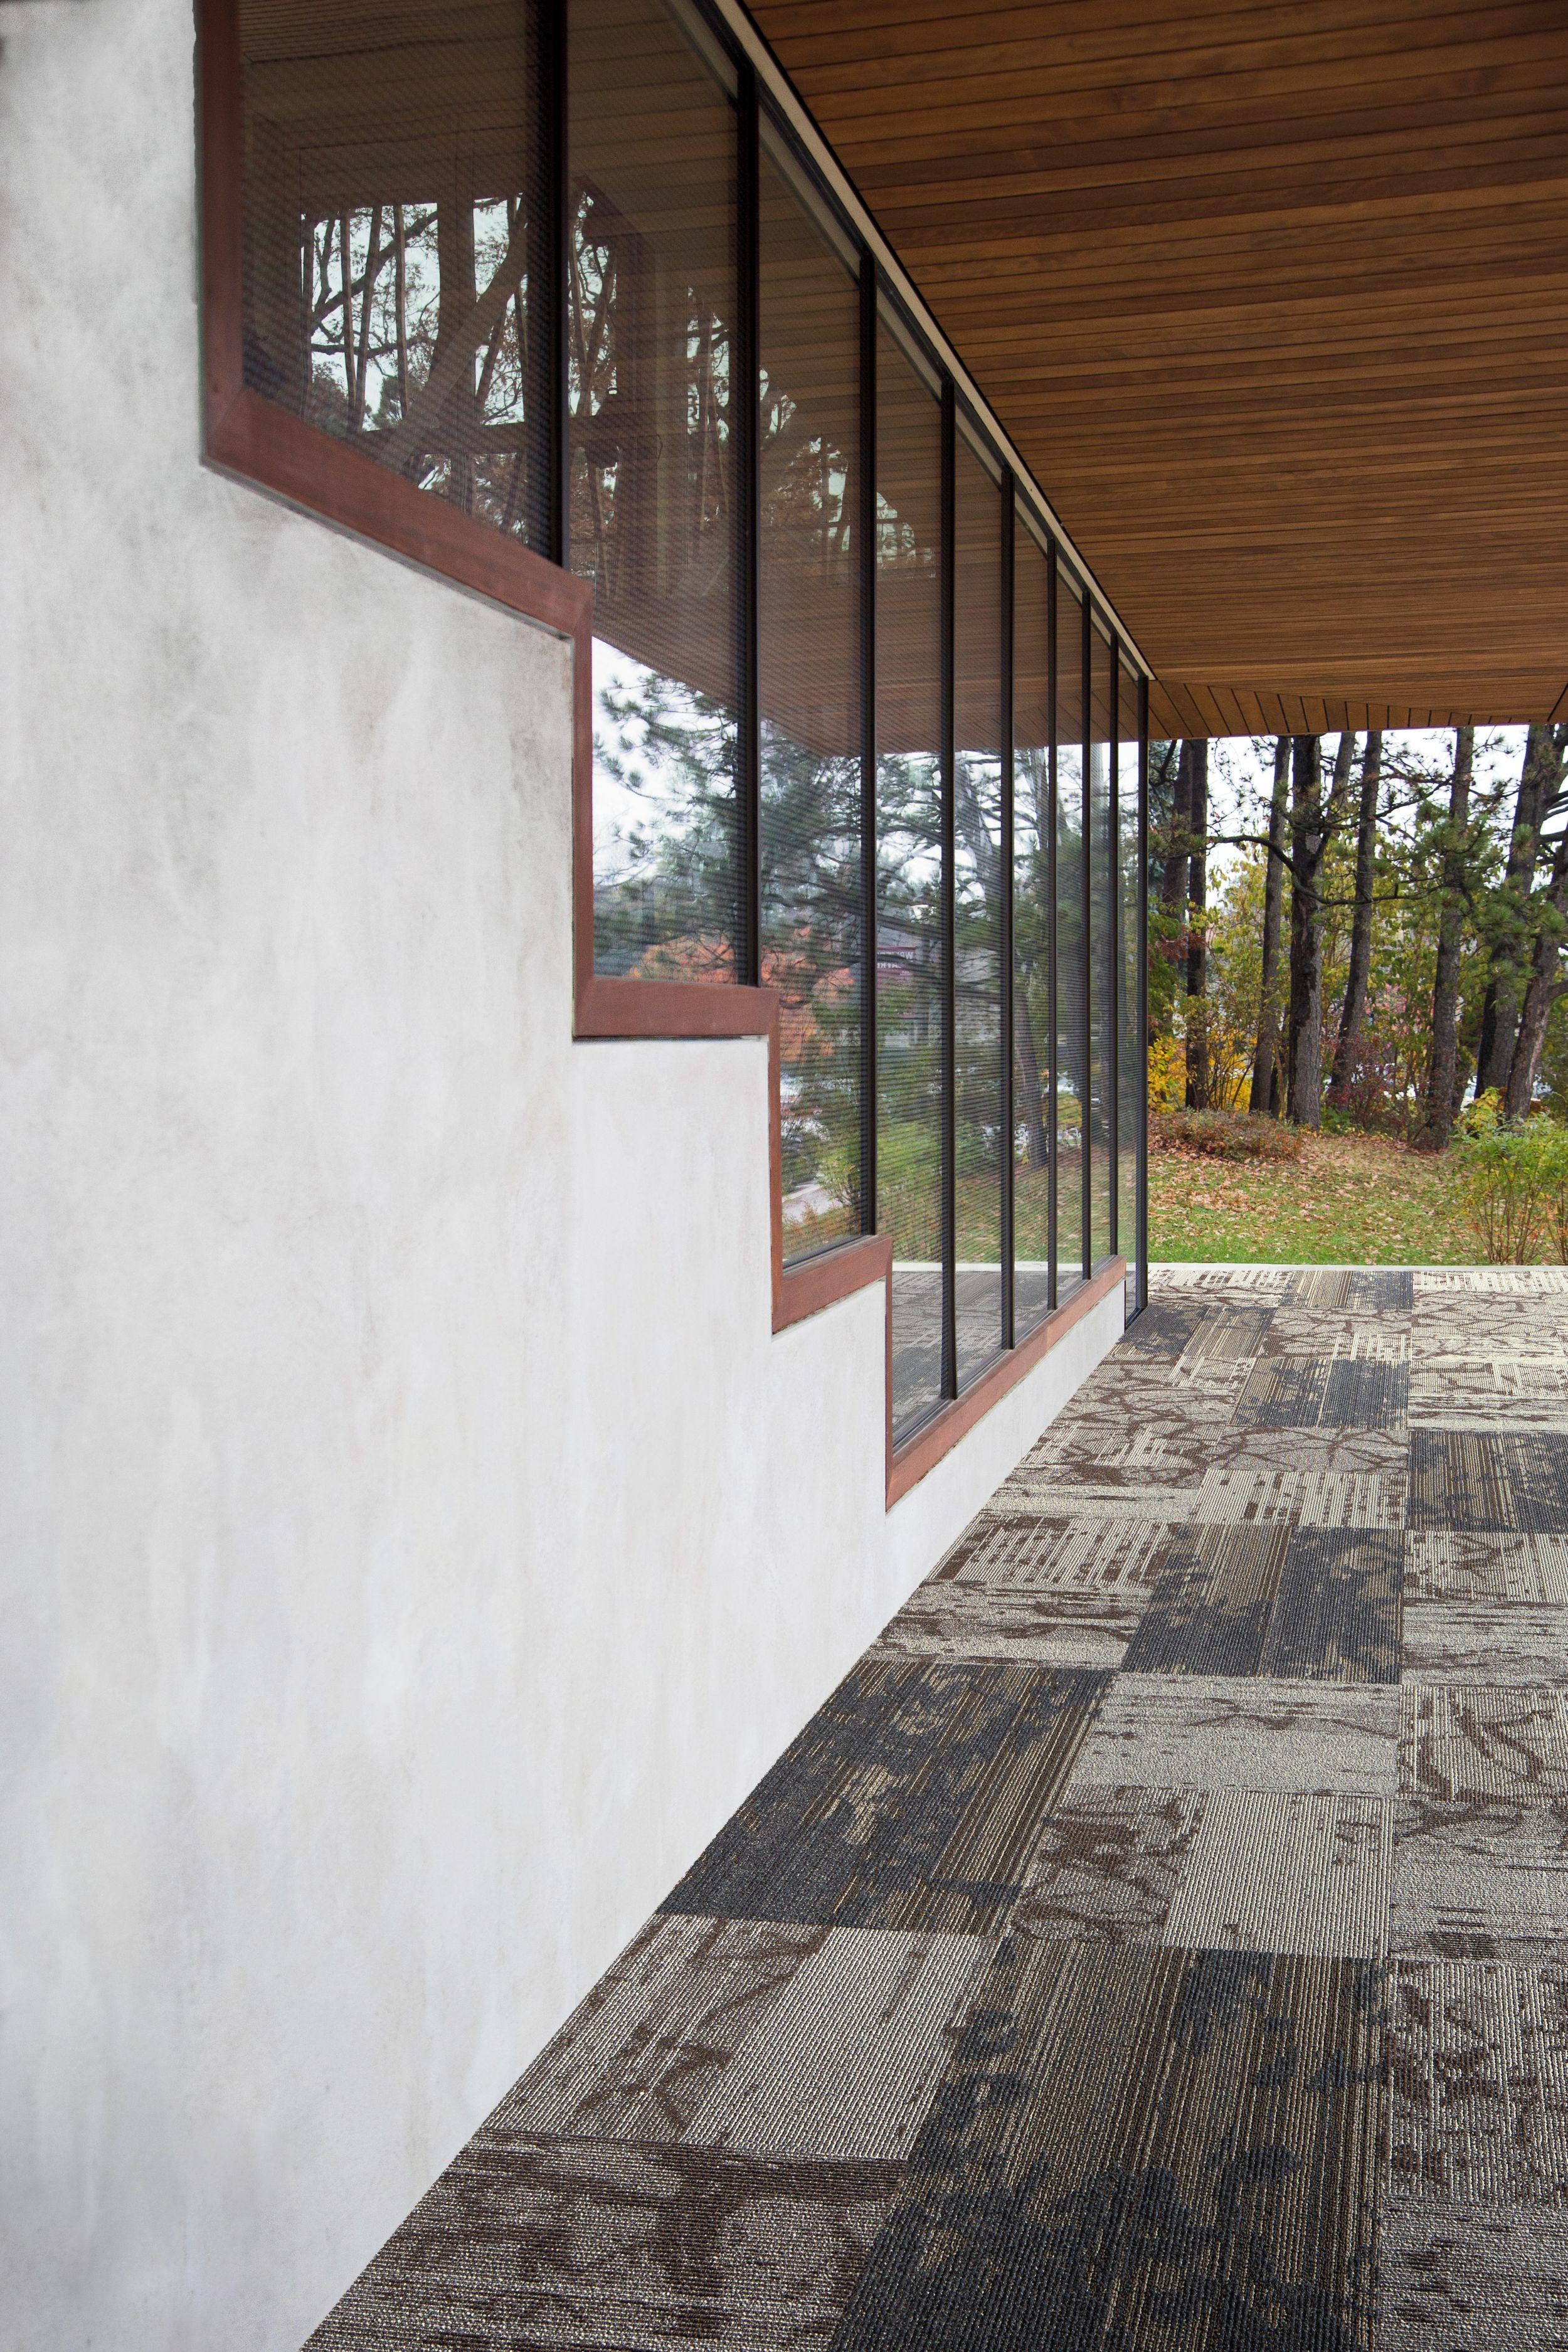 Interface Glazing and Ground plank carpet tile shown for inspiration in outdoor setting image number 11